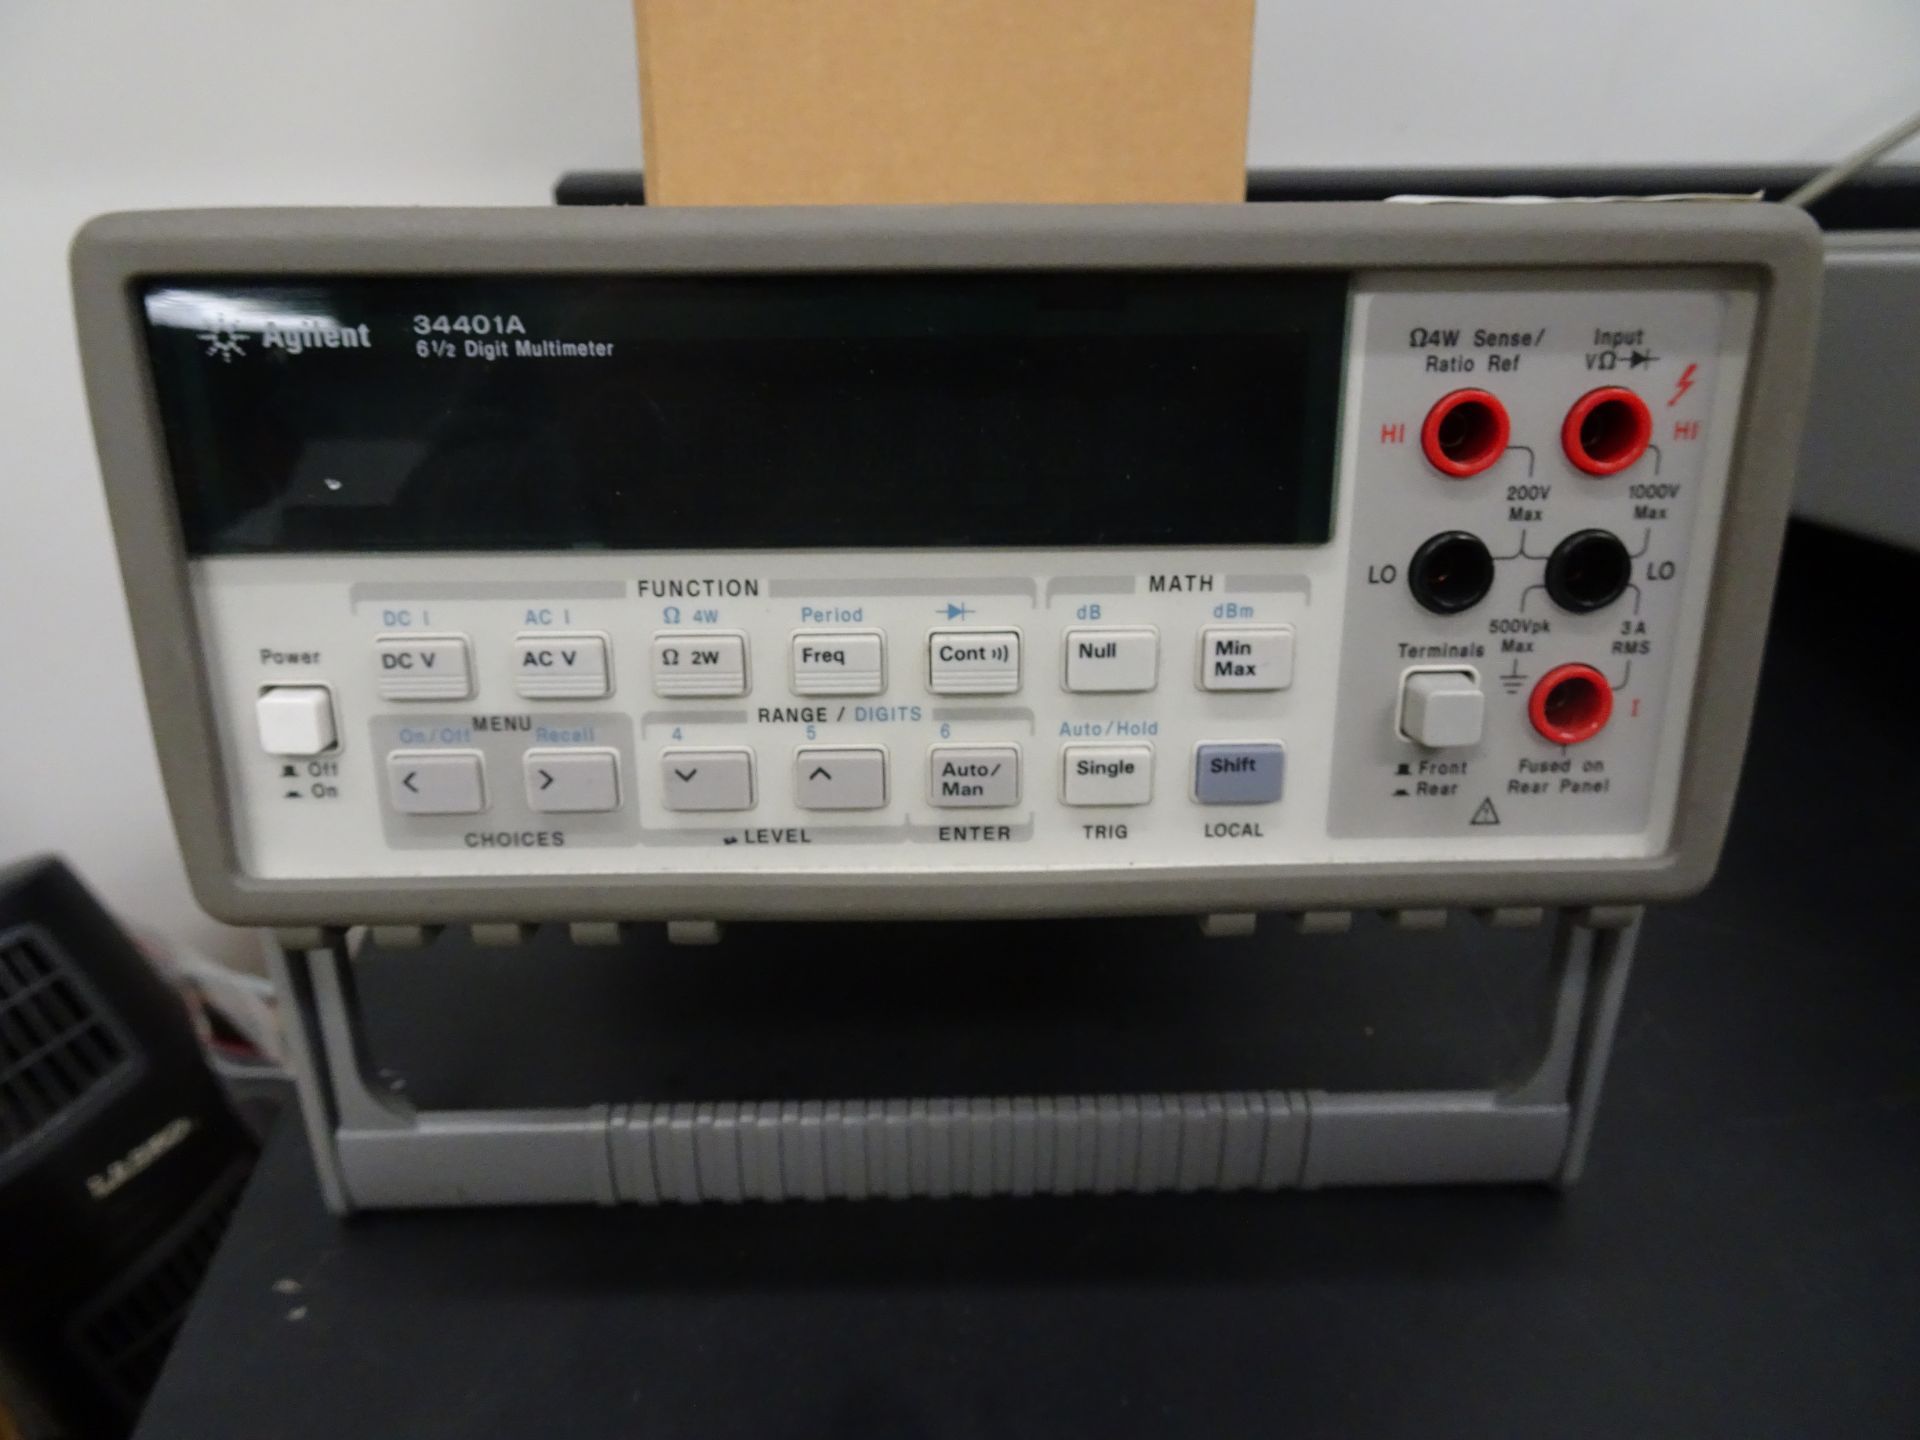 Agilent Model 34401A 6 1/2 Digit Digital Multimeter, sn MY45010549, With Associated Leads - Image 5 of 8